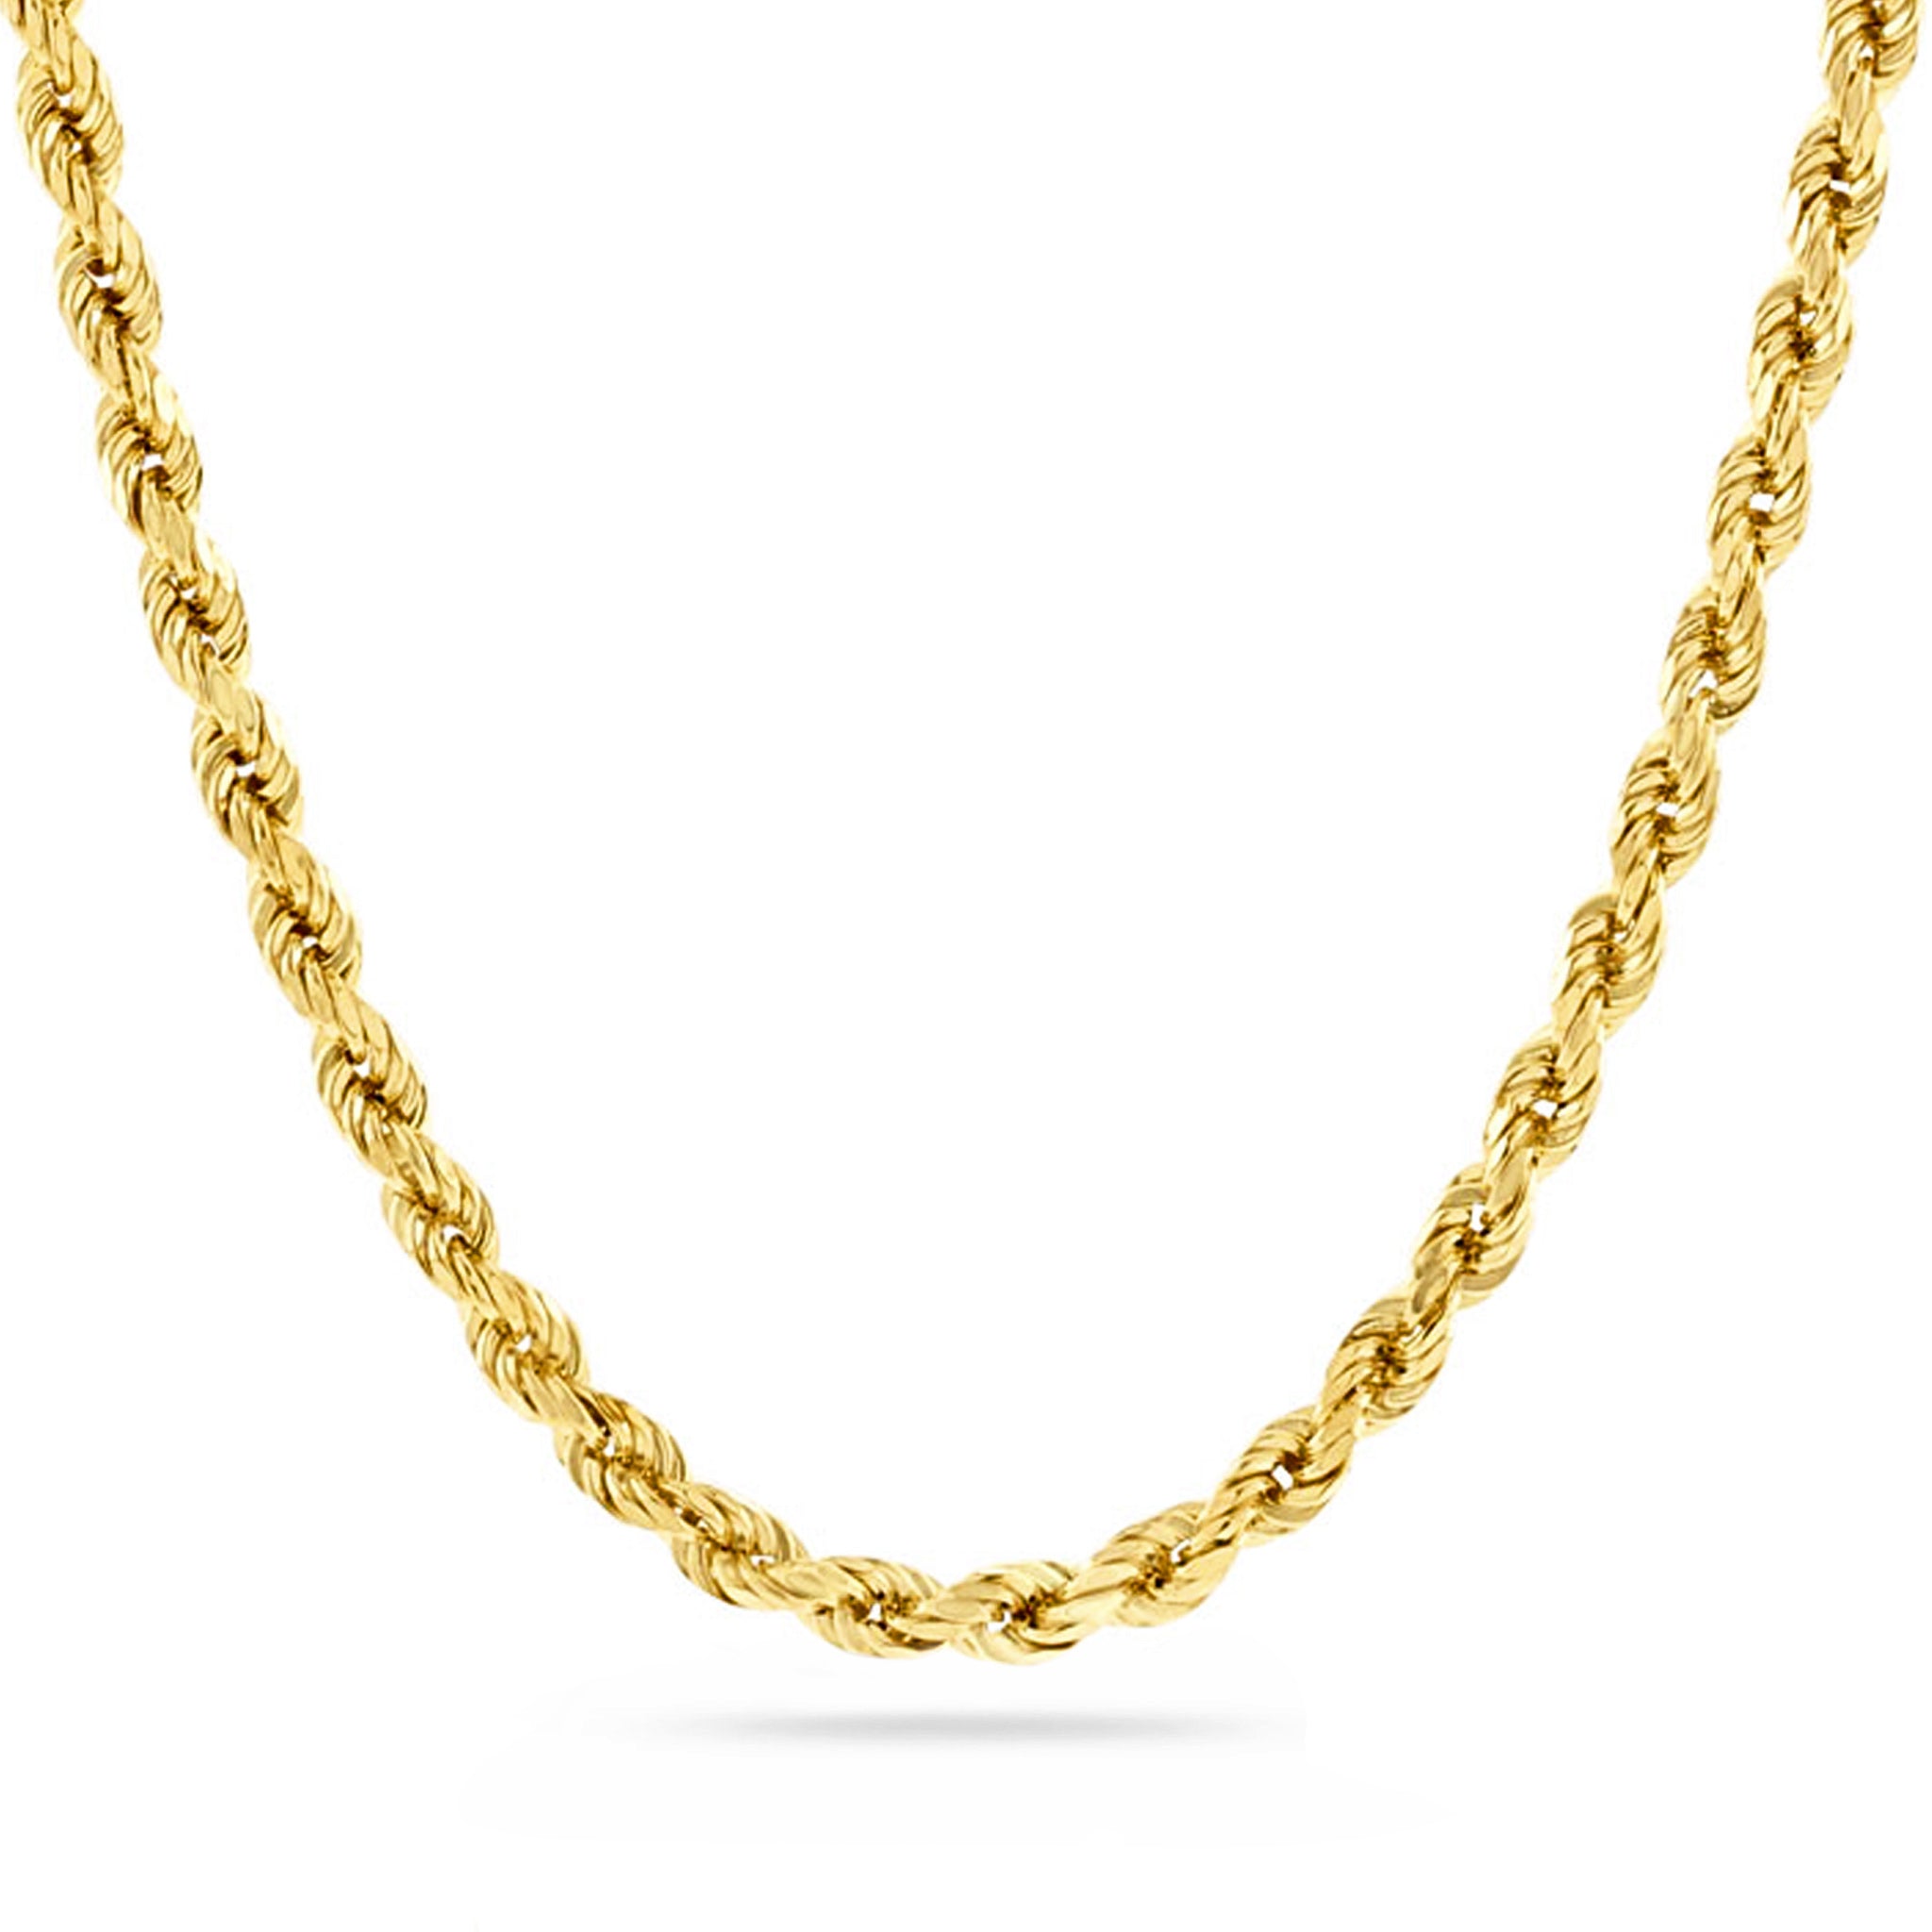 4mm Diamond Cut Rope Chain, 14K Yellow Gold, Proclamation Jewelry 24 / Luxury Lobster Clasp